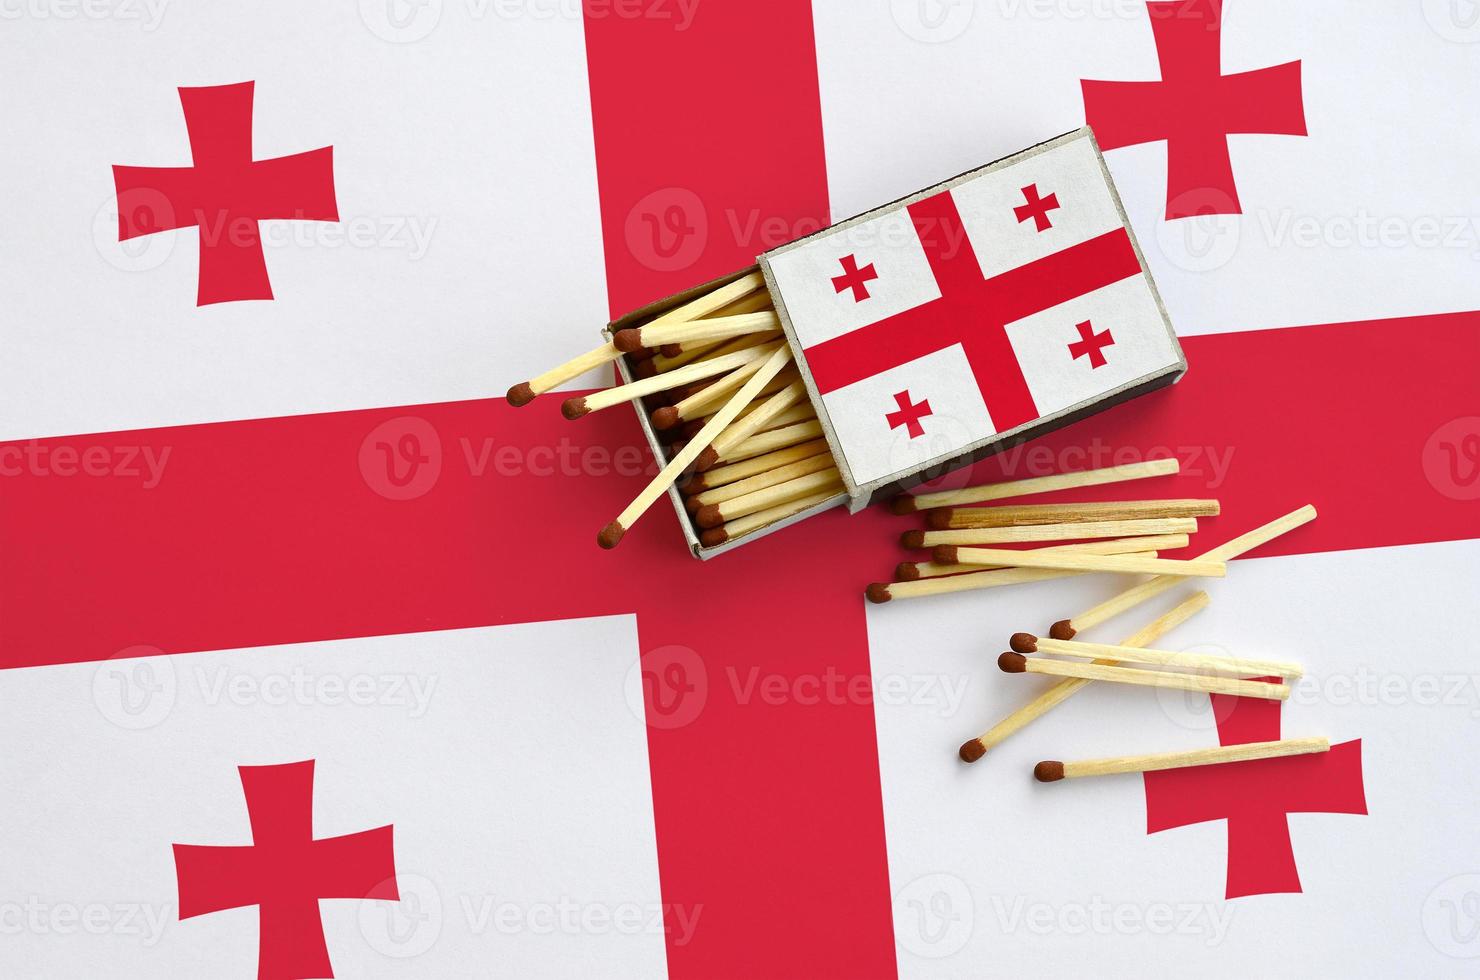 Georgia flag  is shown on an open matchbox, from which several matches fall and lies on a large flag photo